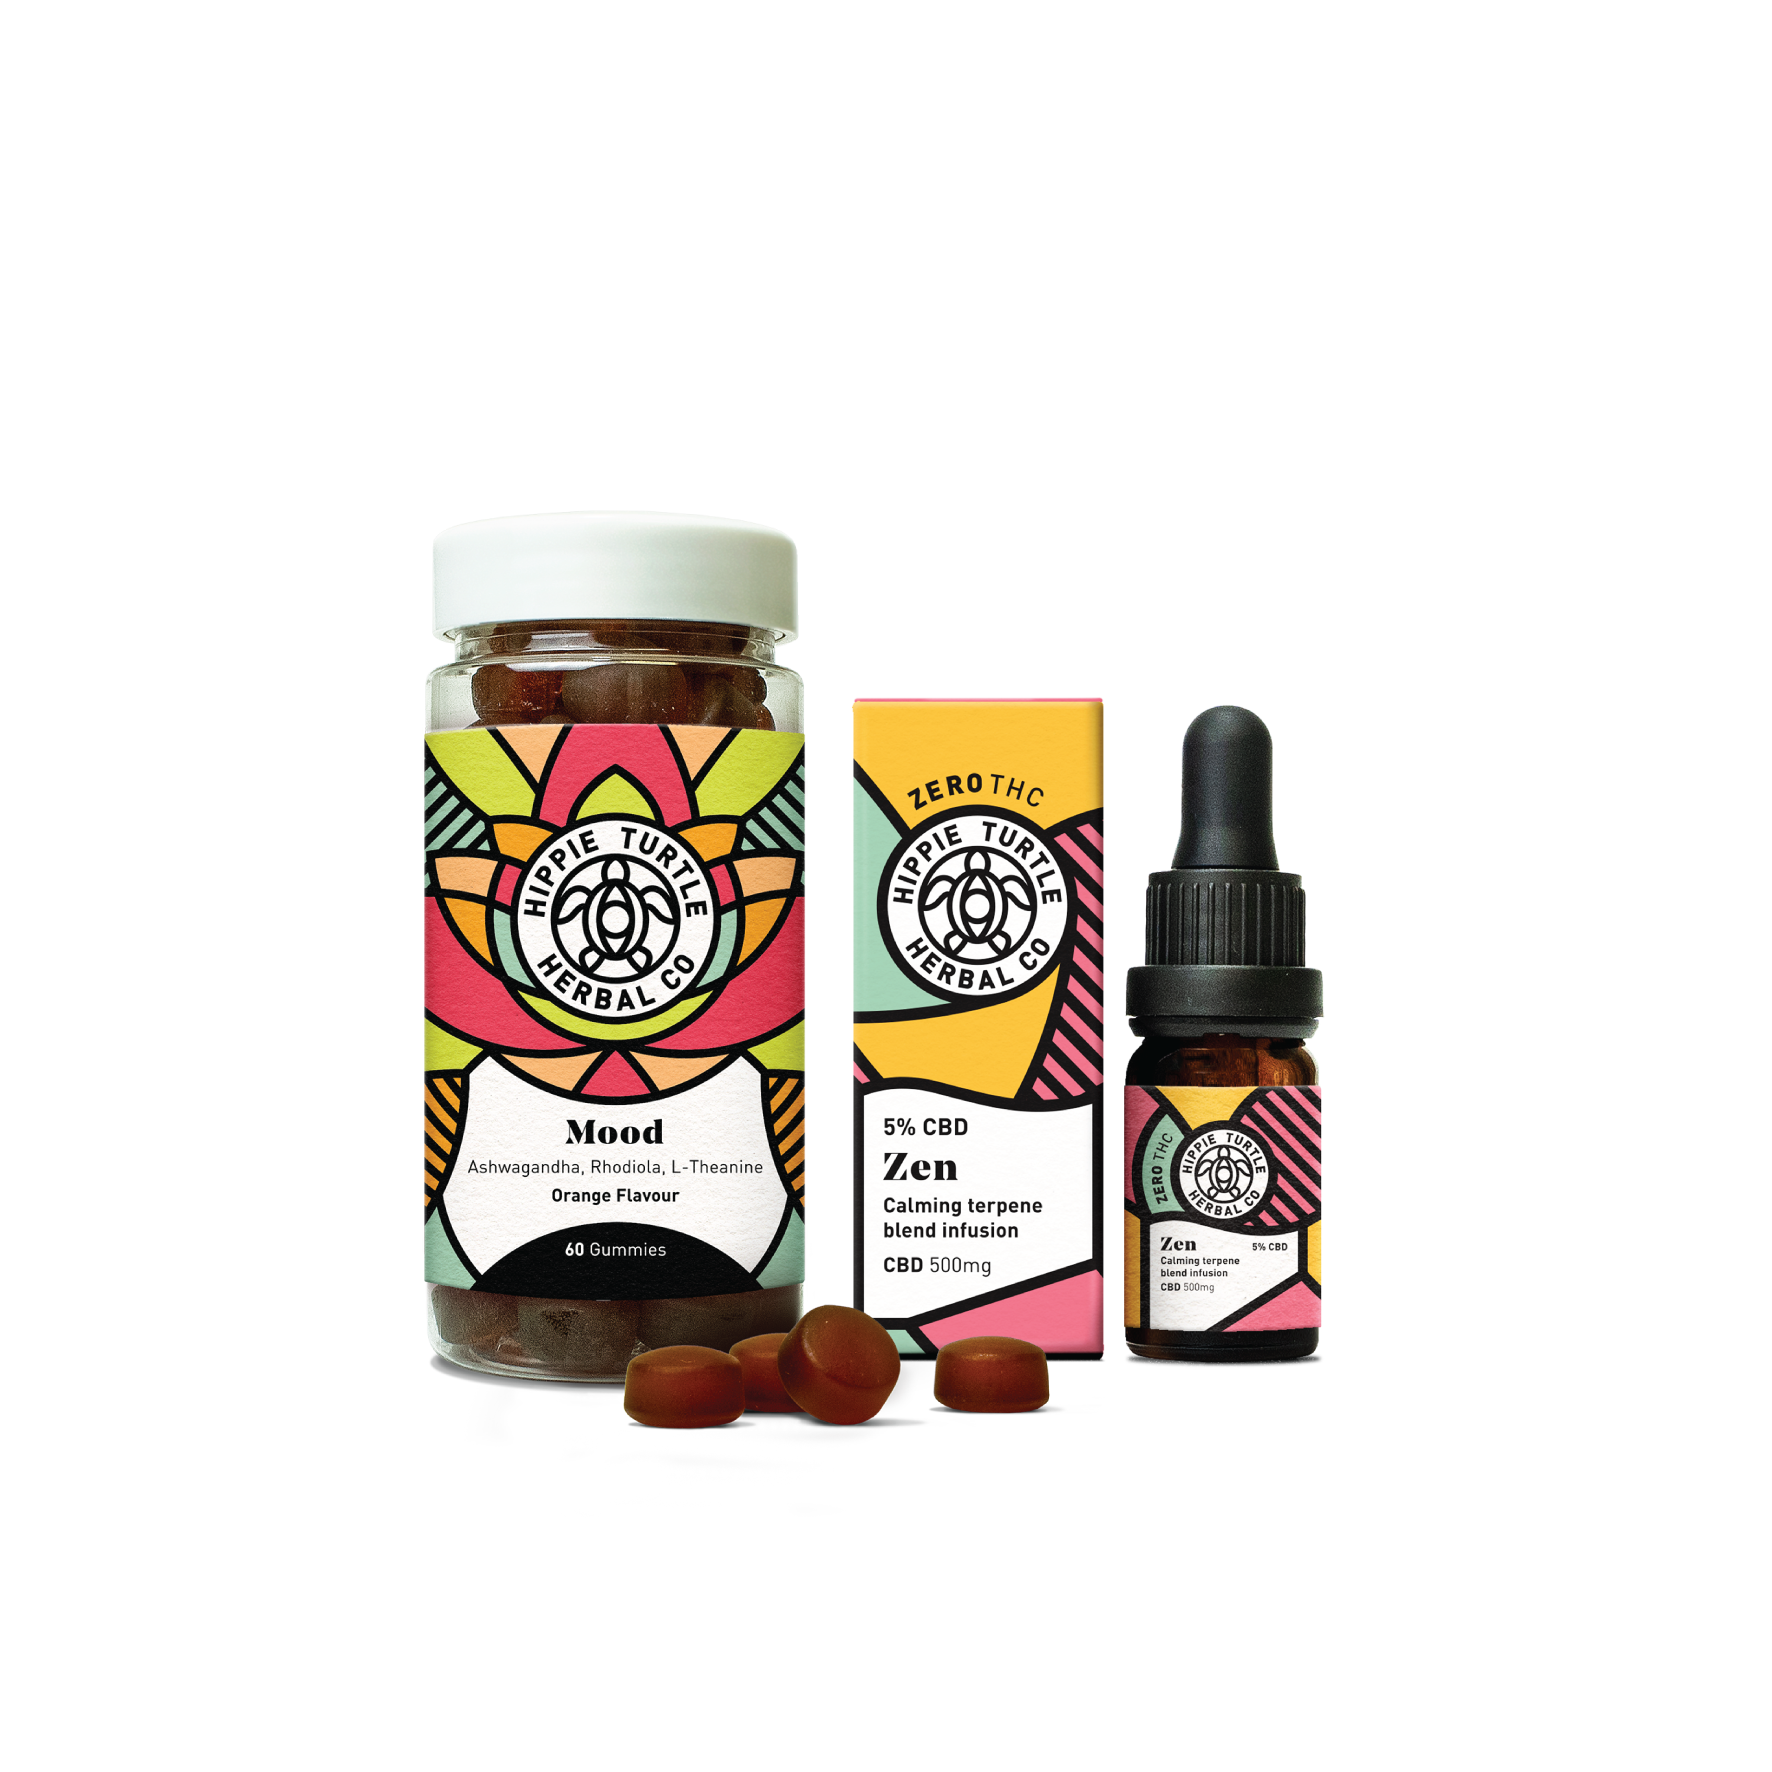 Mood essentials to help anxiety and stress reducing mood support nootropic gummies and pharmacy grade CBD oils for mood, stress and anxiety